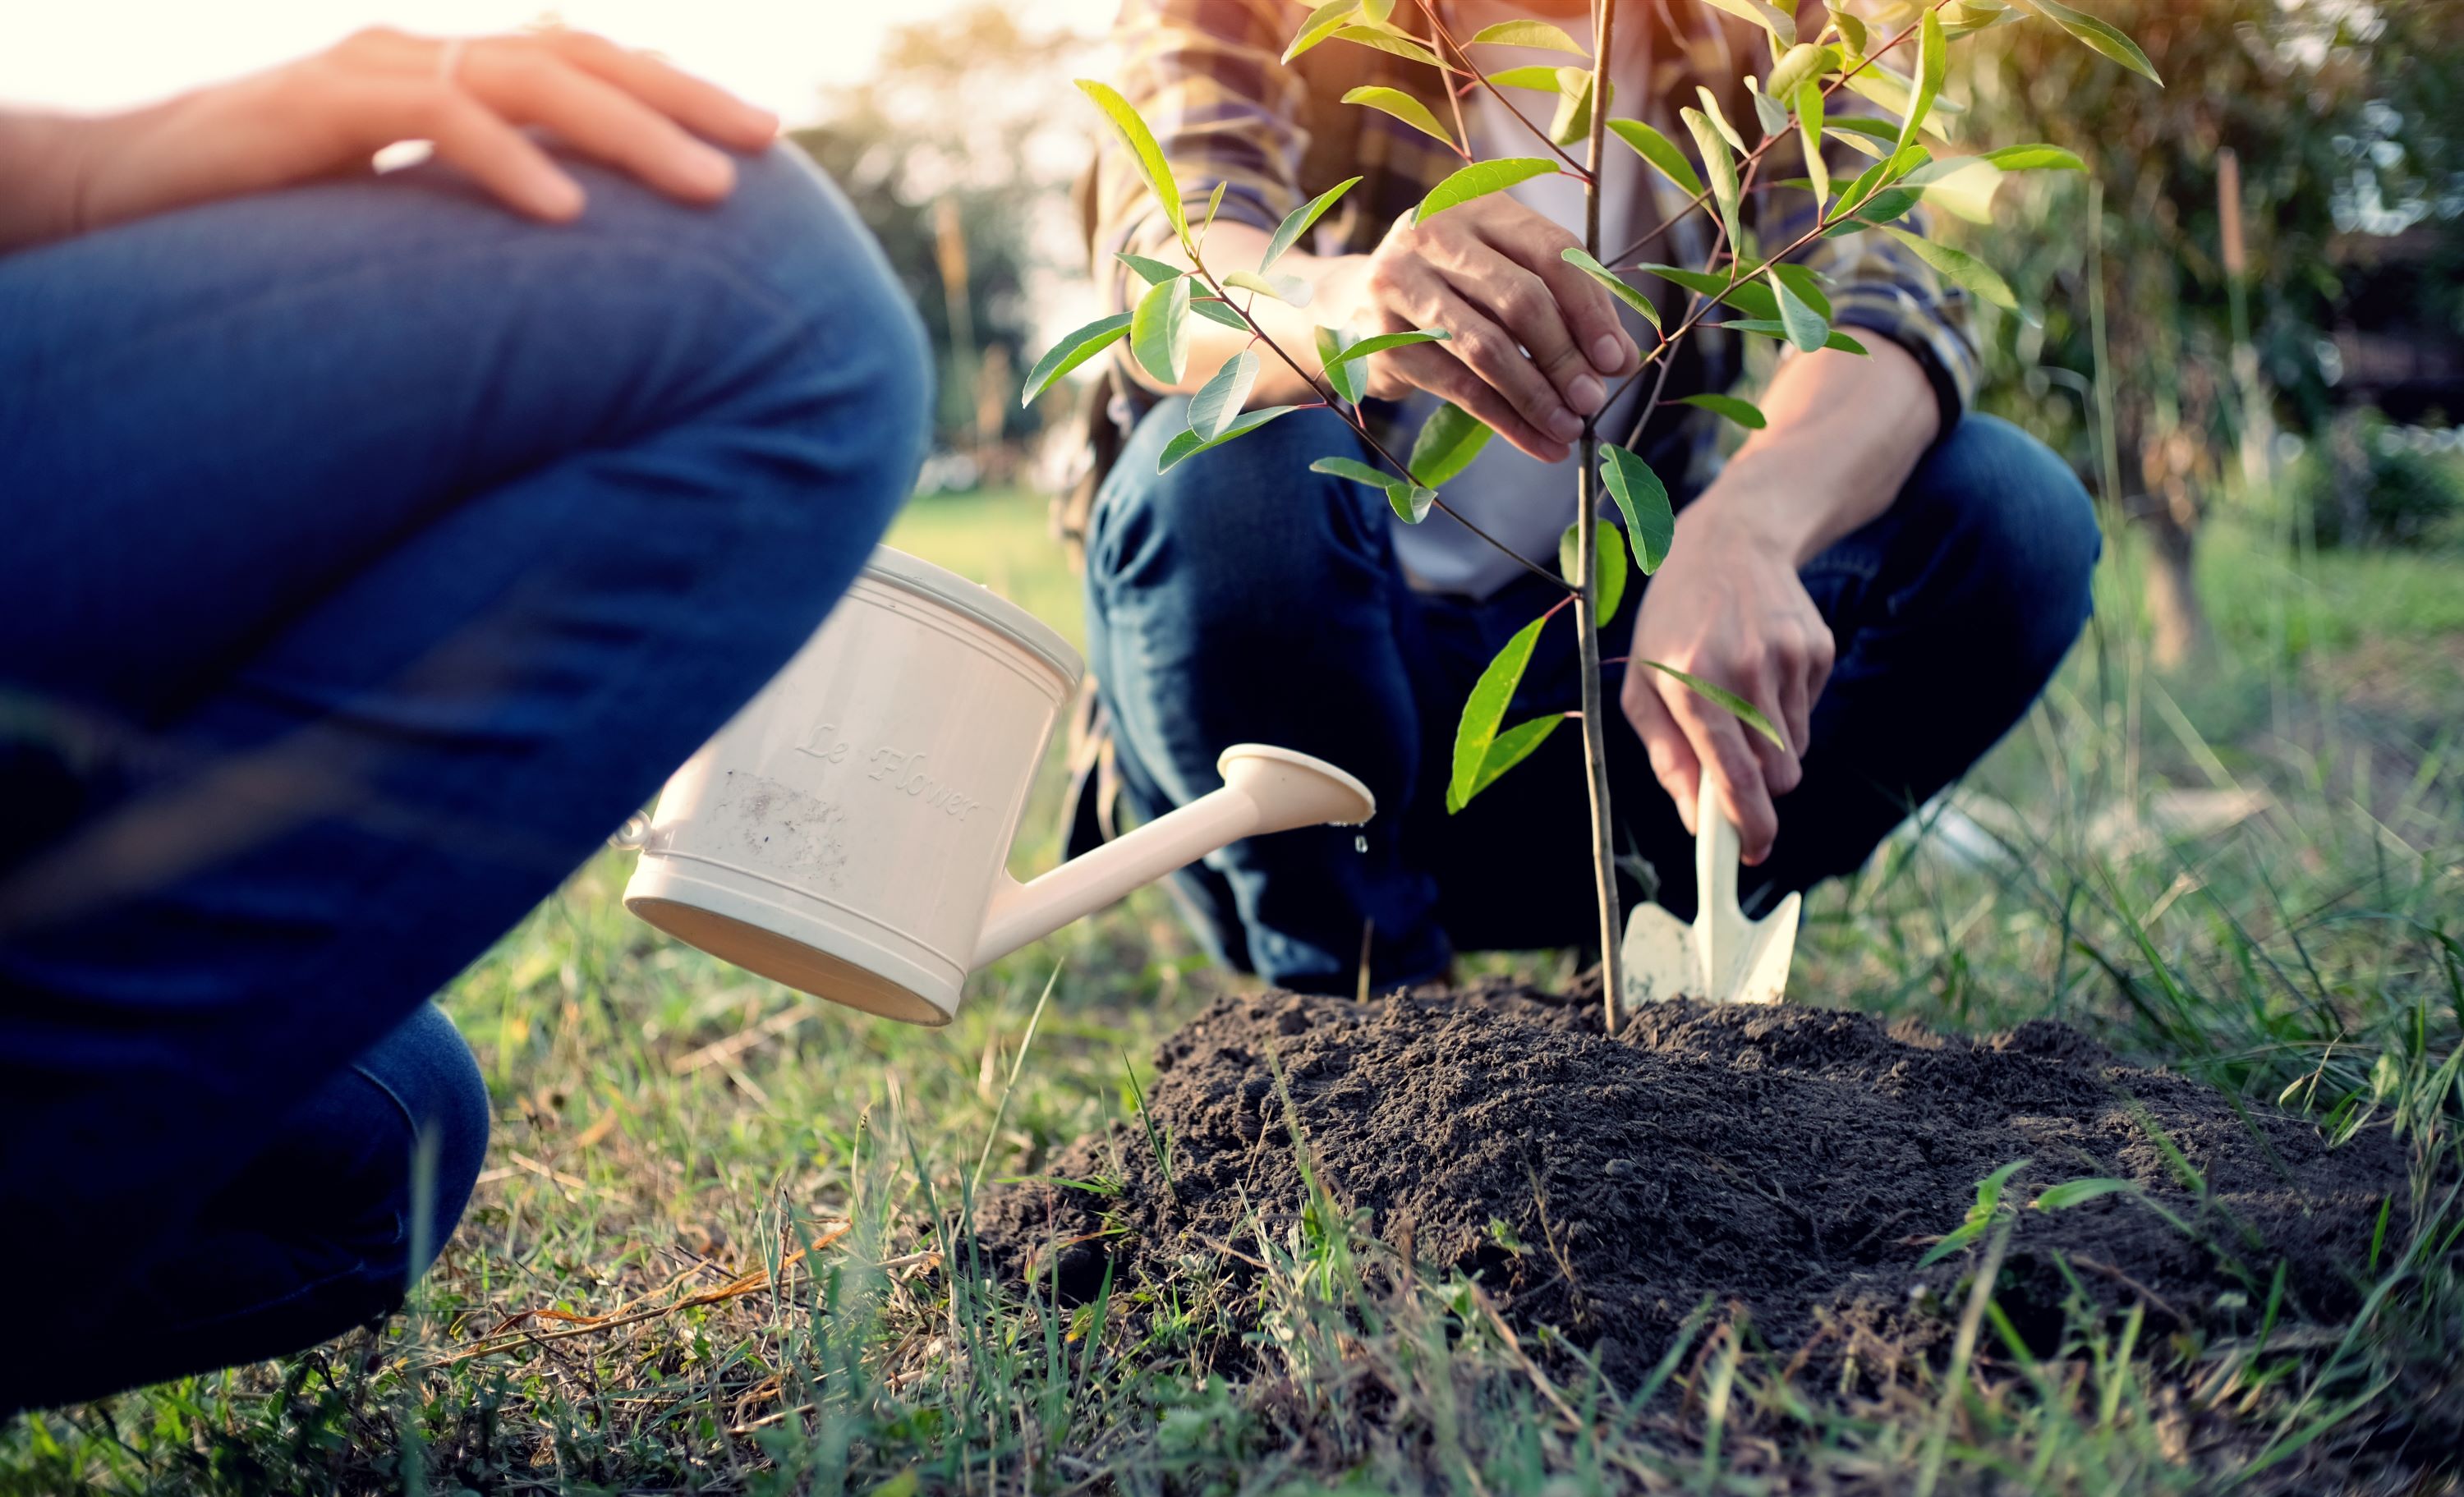 Two people planting a tree.